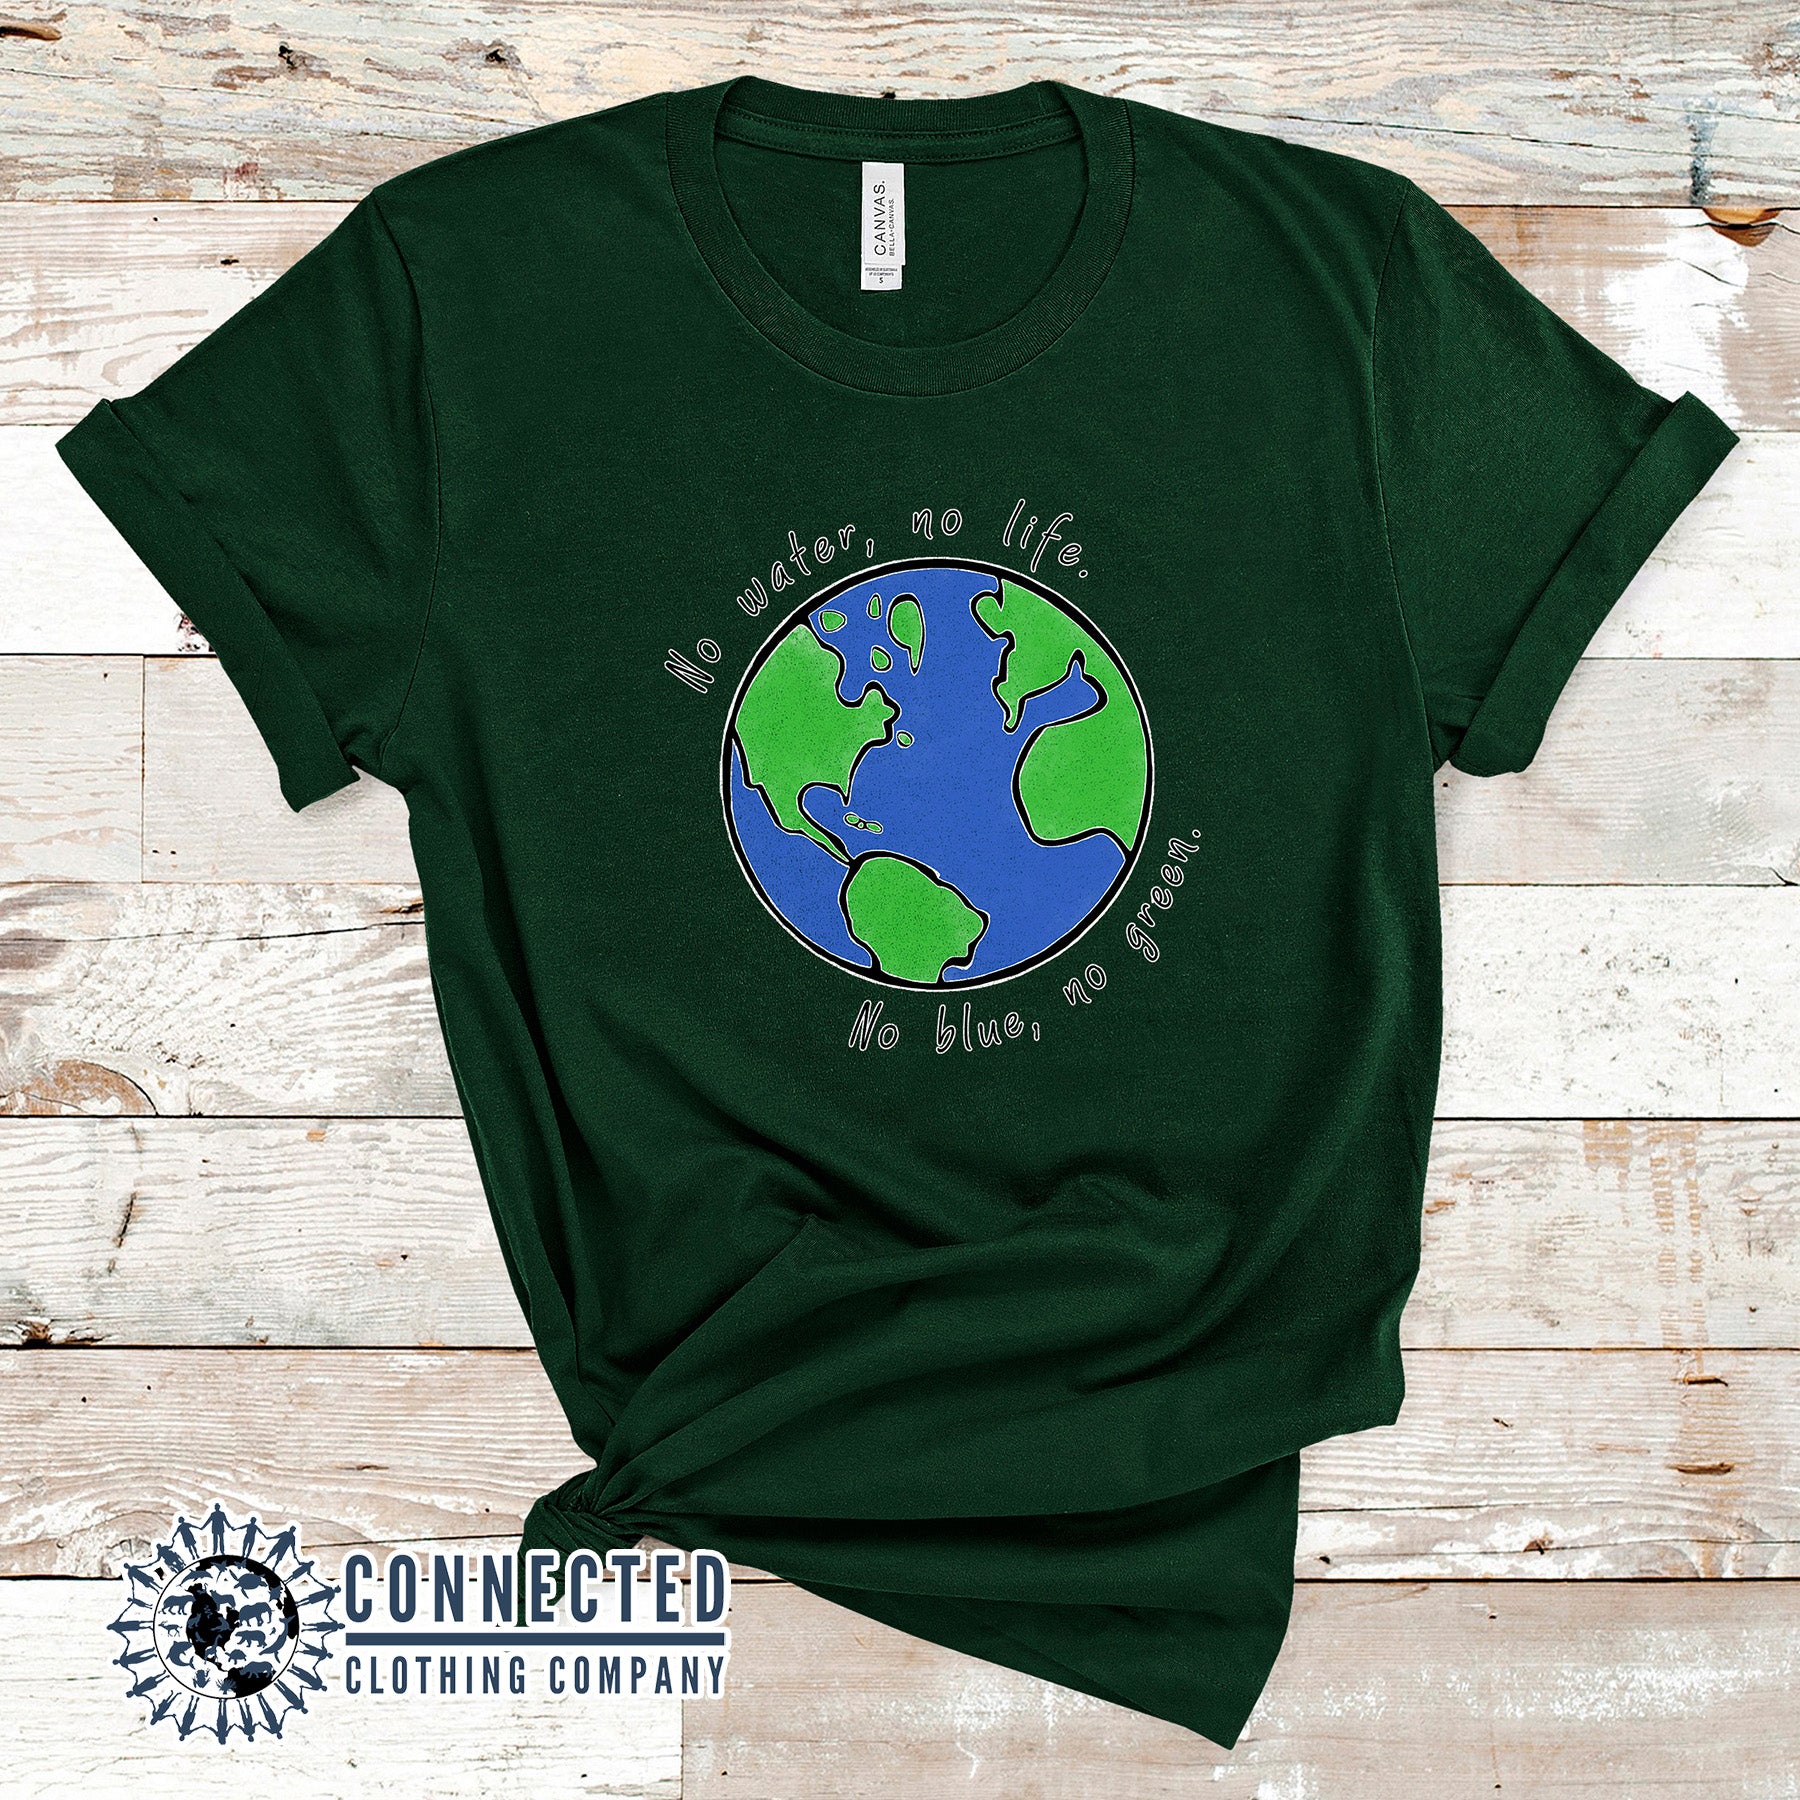 Forest Green No Blue No Green Short-Sleeve Tee in Forest Green reads "no water, no life. no blue, no green." - sweetsherriloudesigns - Ethically and Sustainably Made - 10% of profits donated to ocean conservation